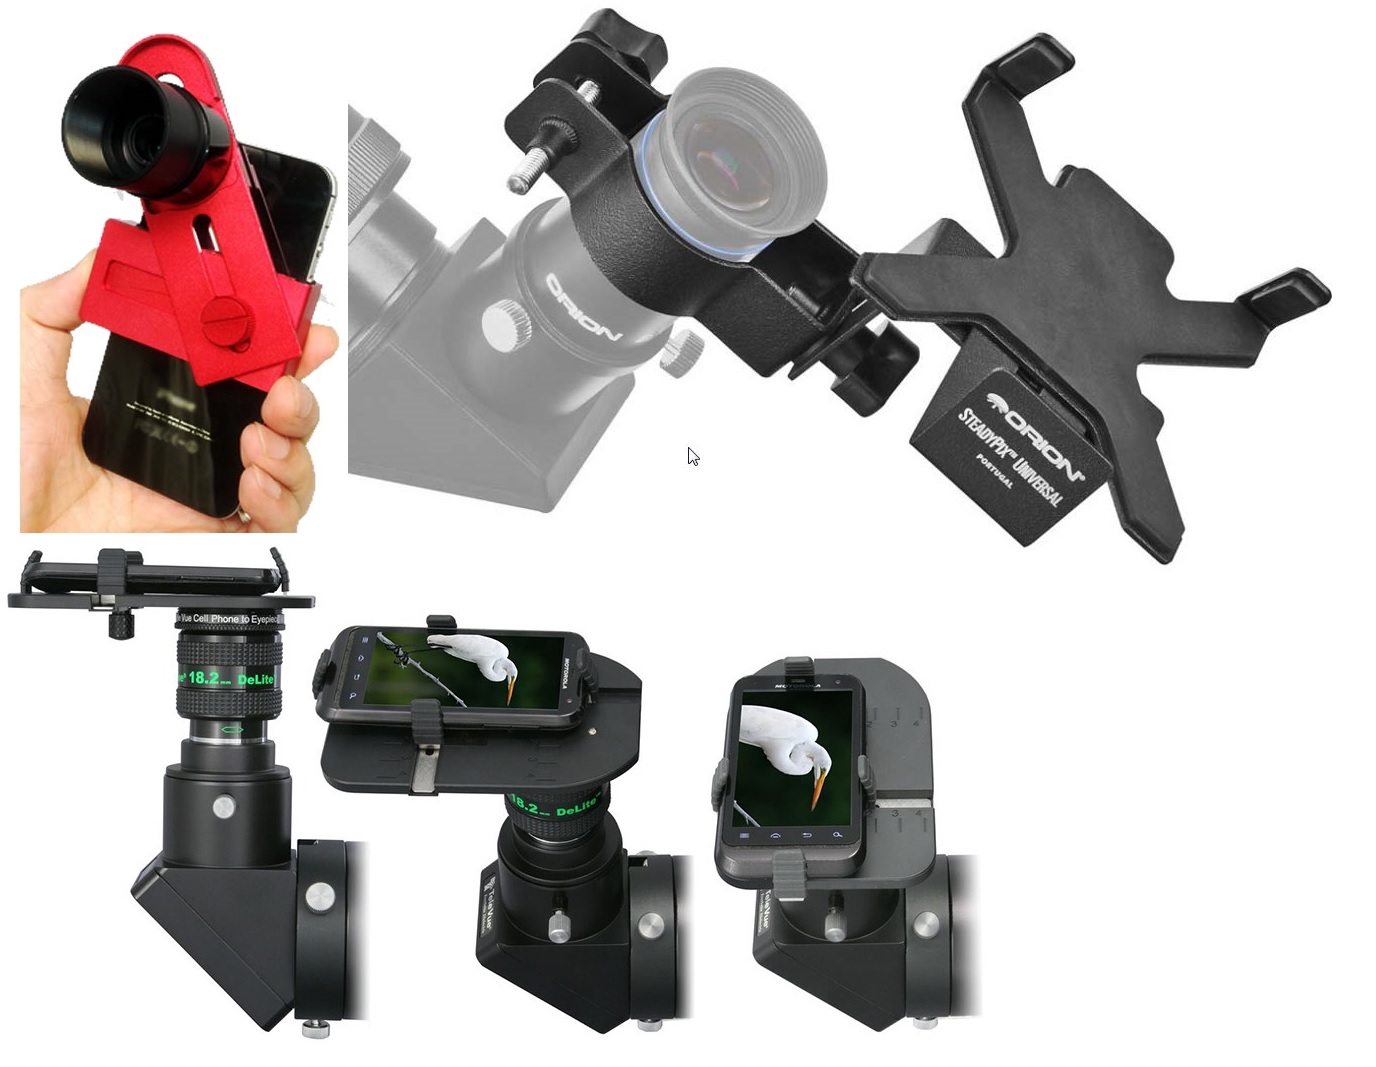 A sampling of several inexpensive smartphone adapters that let you mount your device on a telescope or binoculars. Clockwise from upper left: the iOptron Universal Smartphone Eyepiece Adapter, the Orion SteadyPix Universal Smartphone Adapter, and the TeleVue FoneMate.